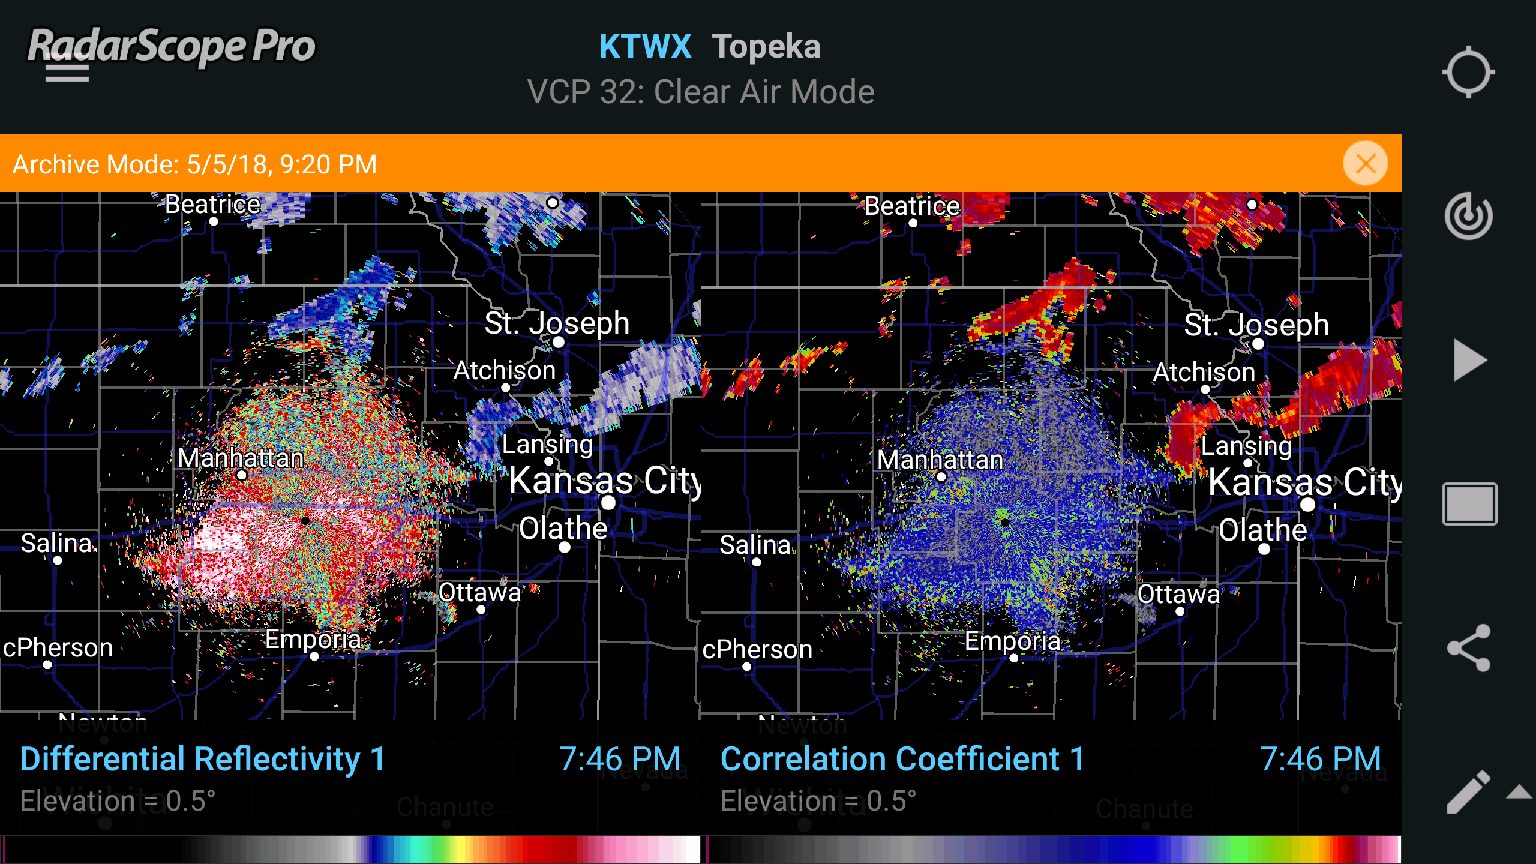 Showers and outflow boundaries to the north of the radar, followed by the onset of nocturnal bird migration using dual-pol.